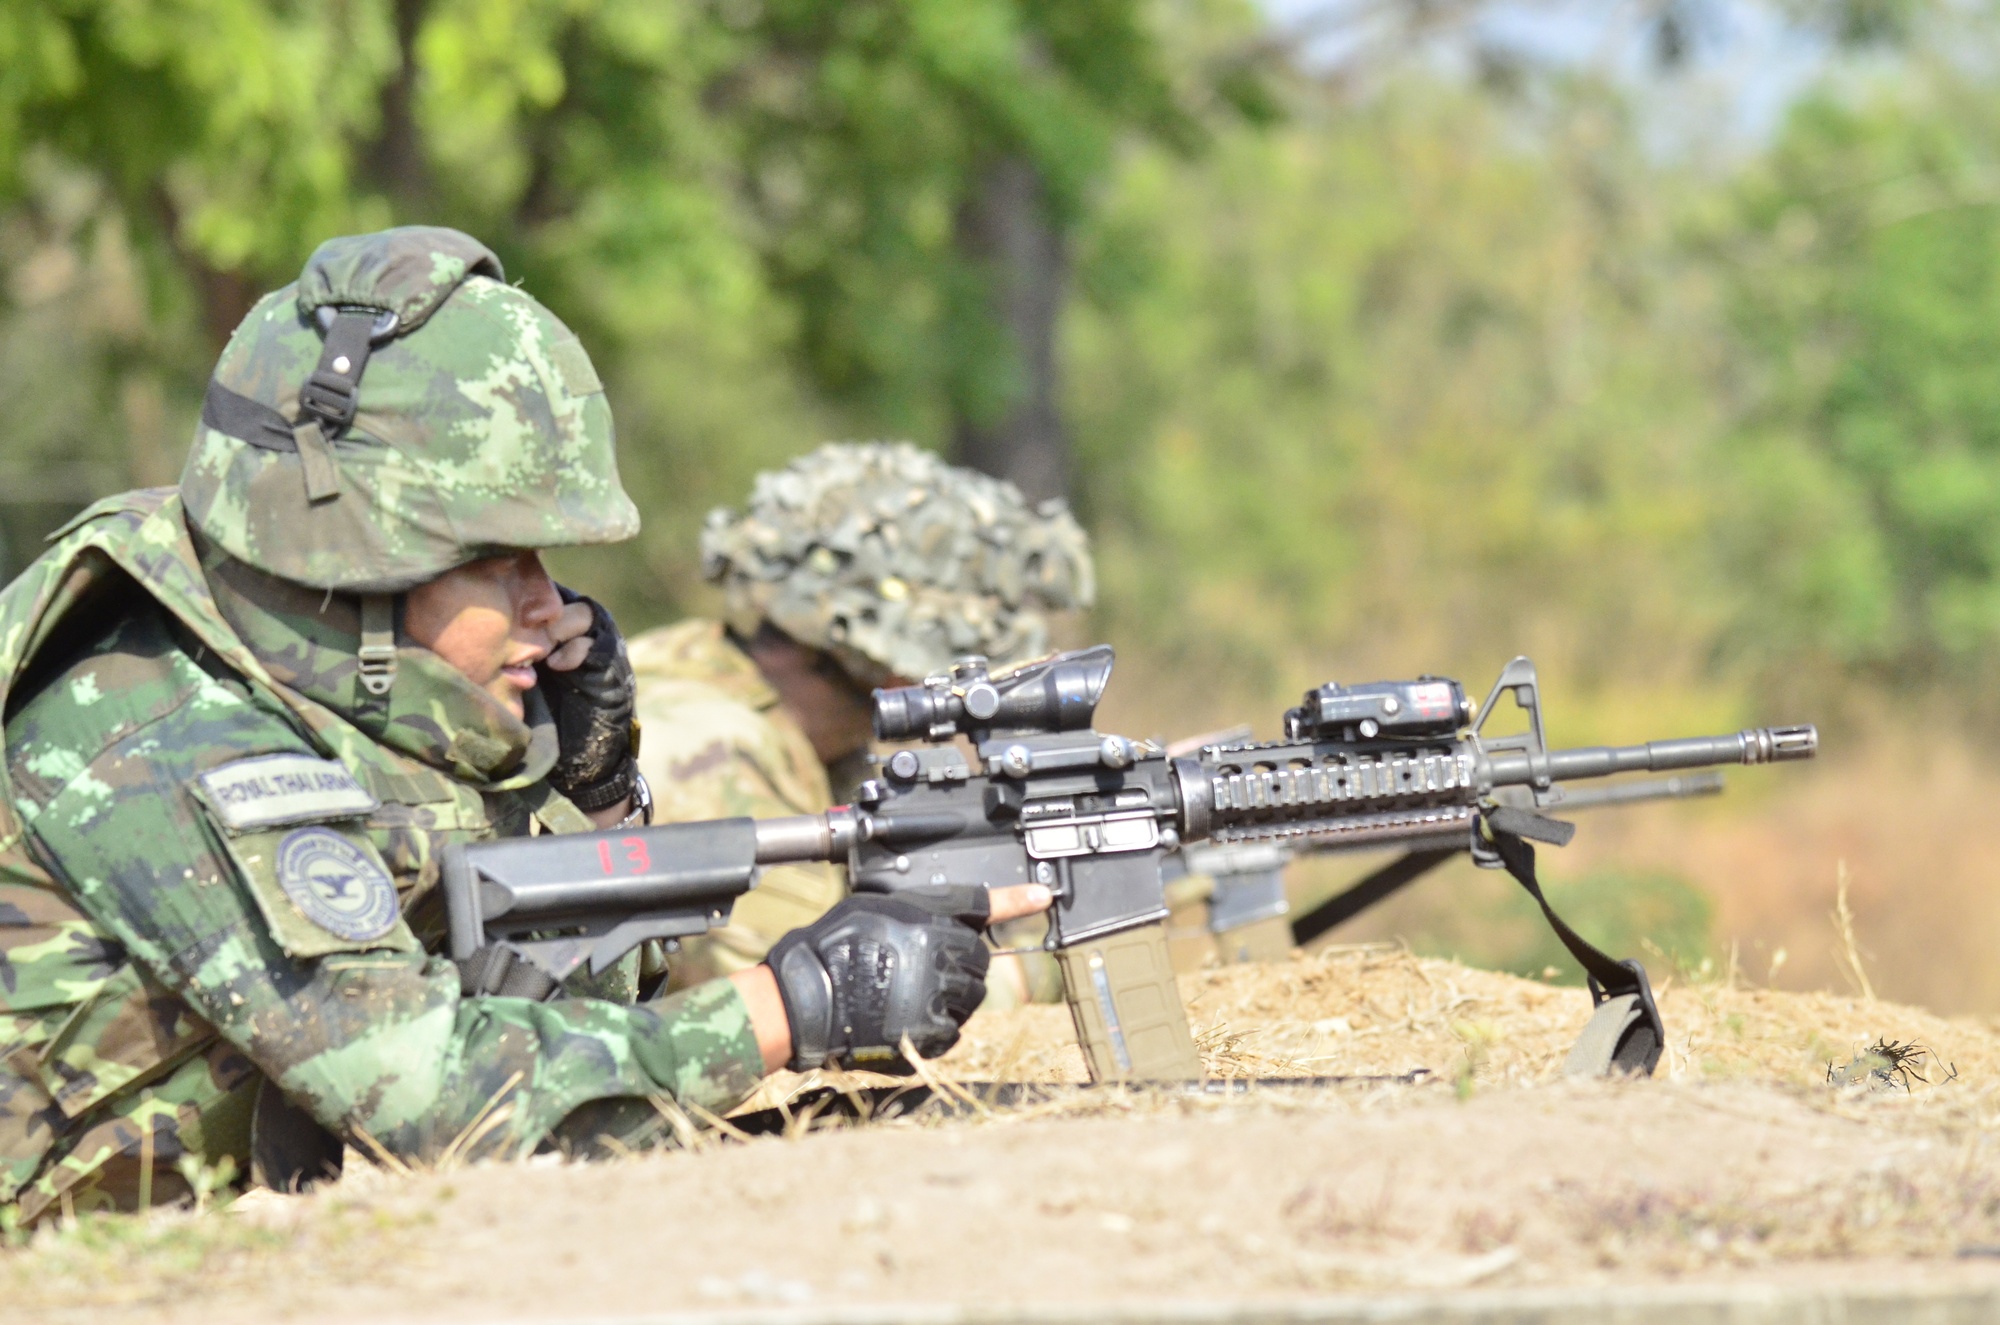 Images - Cobra Gold 18: Thai and Army train together  - DVIDS